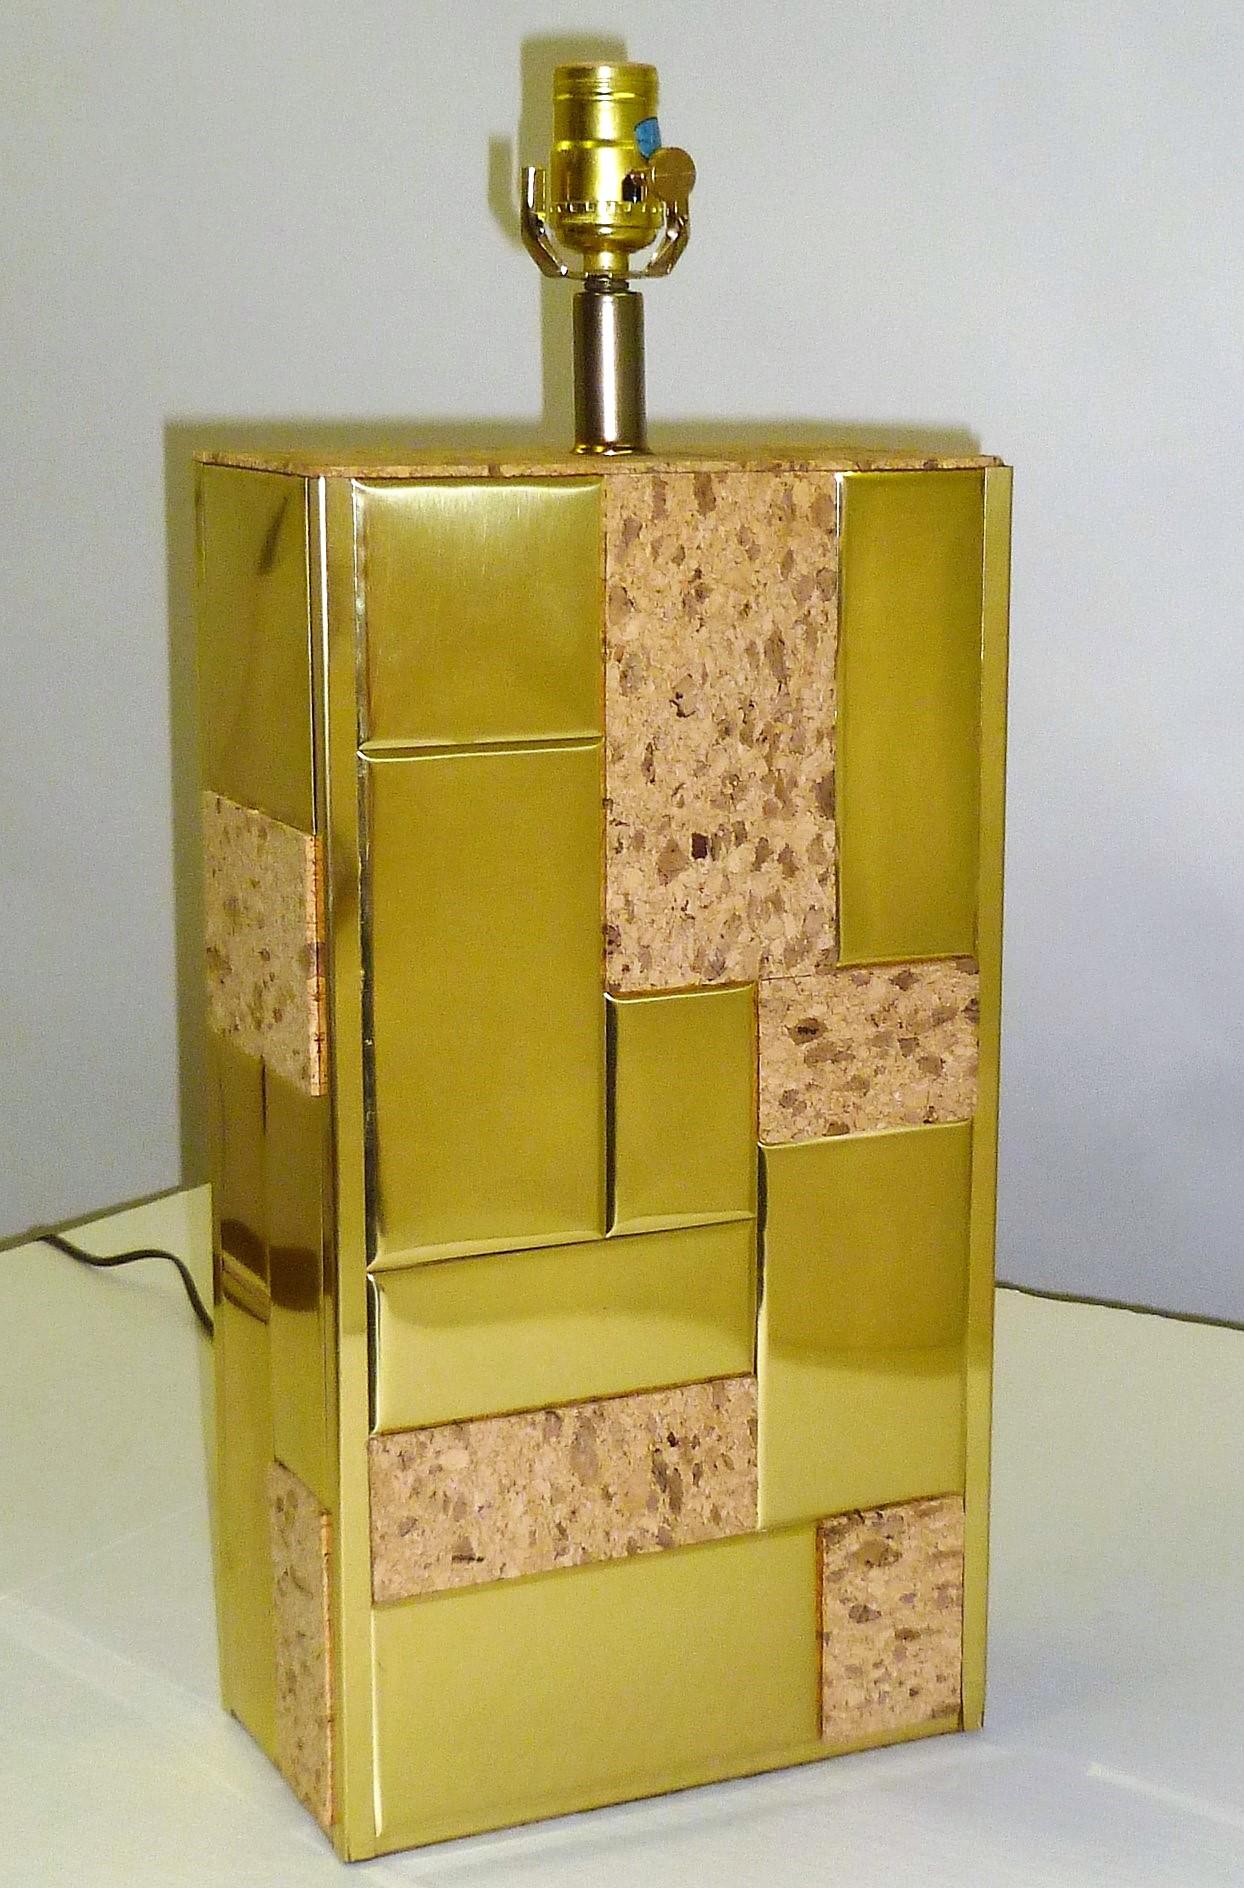 American Brass Tile and Cork Paul Evans Cityscape Style 1970s Organic Modern Table Lamp